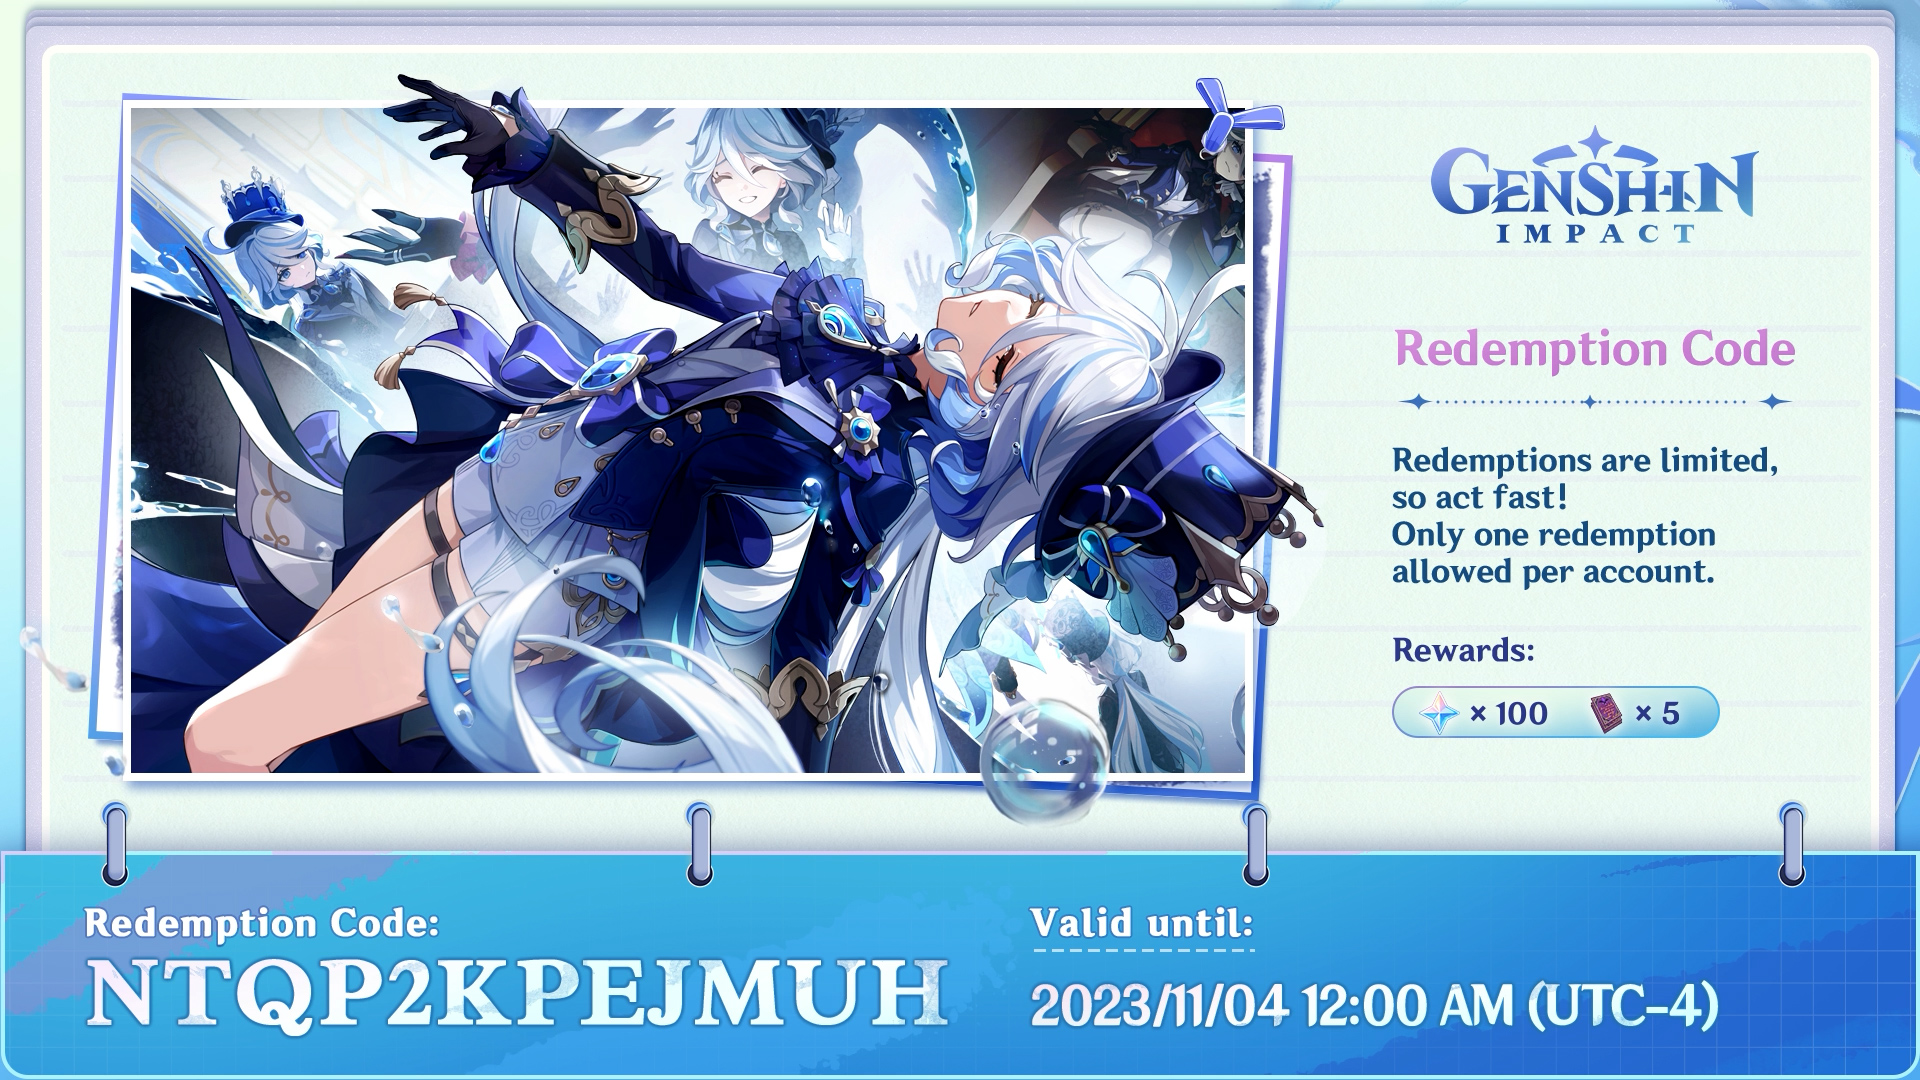 Genshin Impact on X: #GenshinImpact Special Program Redemption Codes  Travelers, here are the redemption codes for this Special Program!  Primogems ×100 + Mystic Enhancement Ore ×10 FB8PFFHT364M Primogems ×100 +  Hero's Wit ×